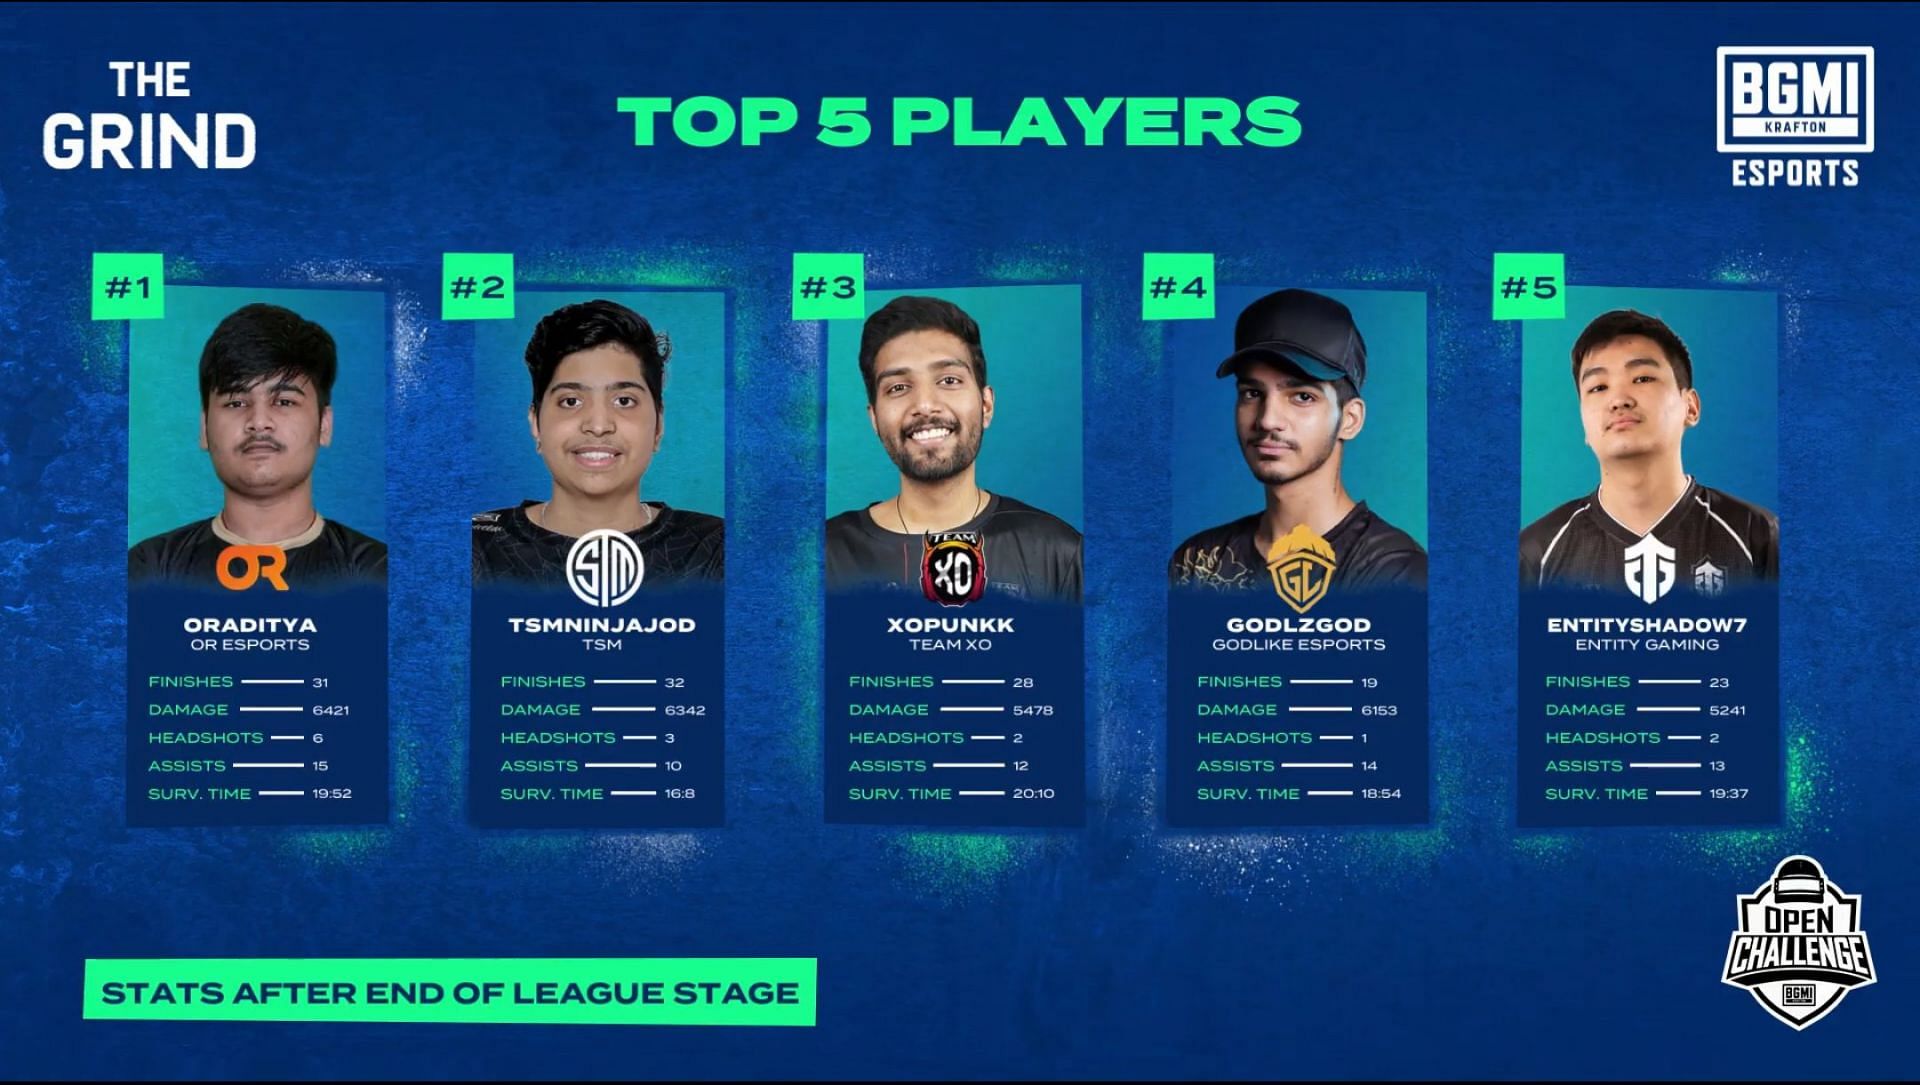 Top 5 players from BMOC The Grind League Stage (Image via BGMI)